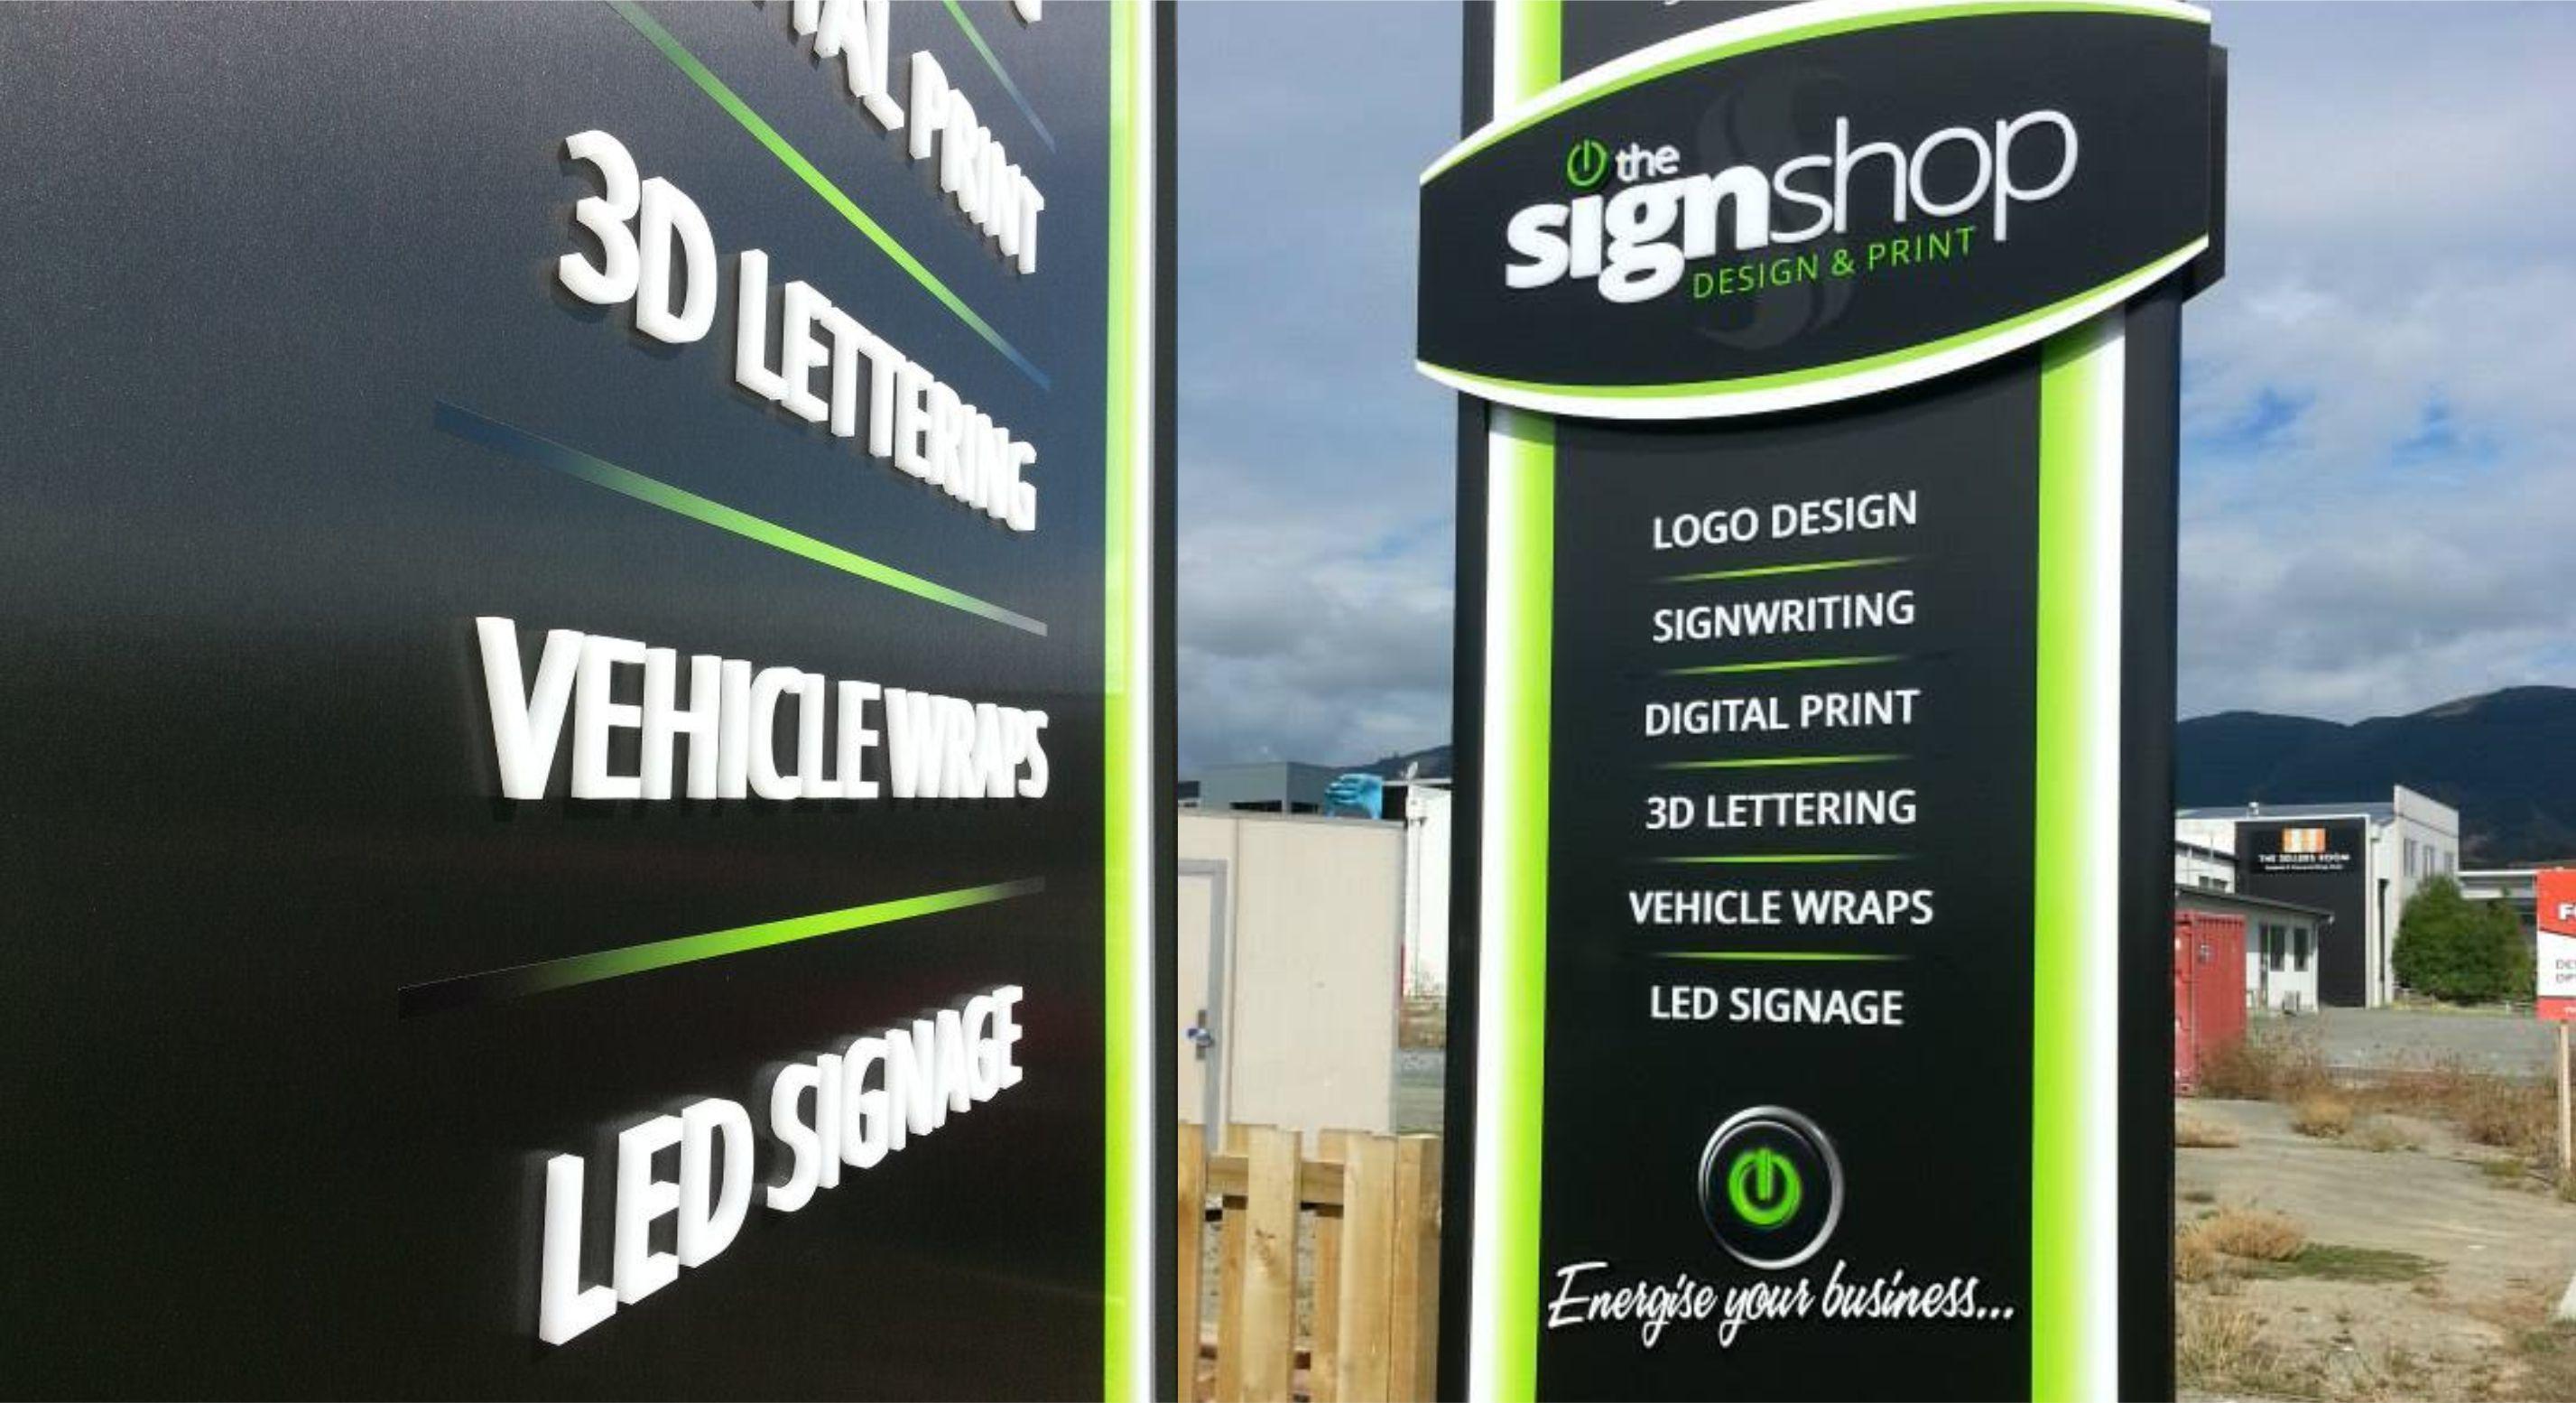 SignShop Logo - Services Signshop Nelson